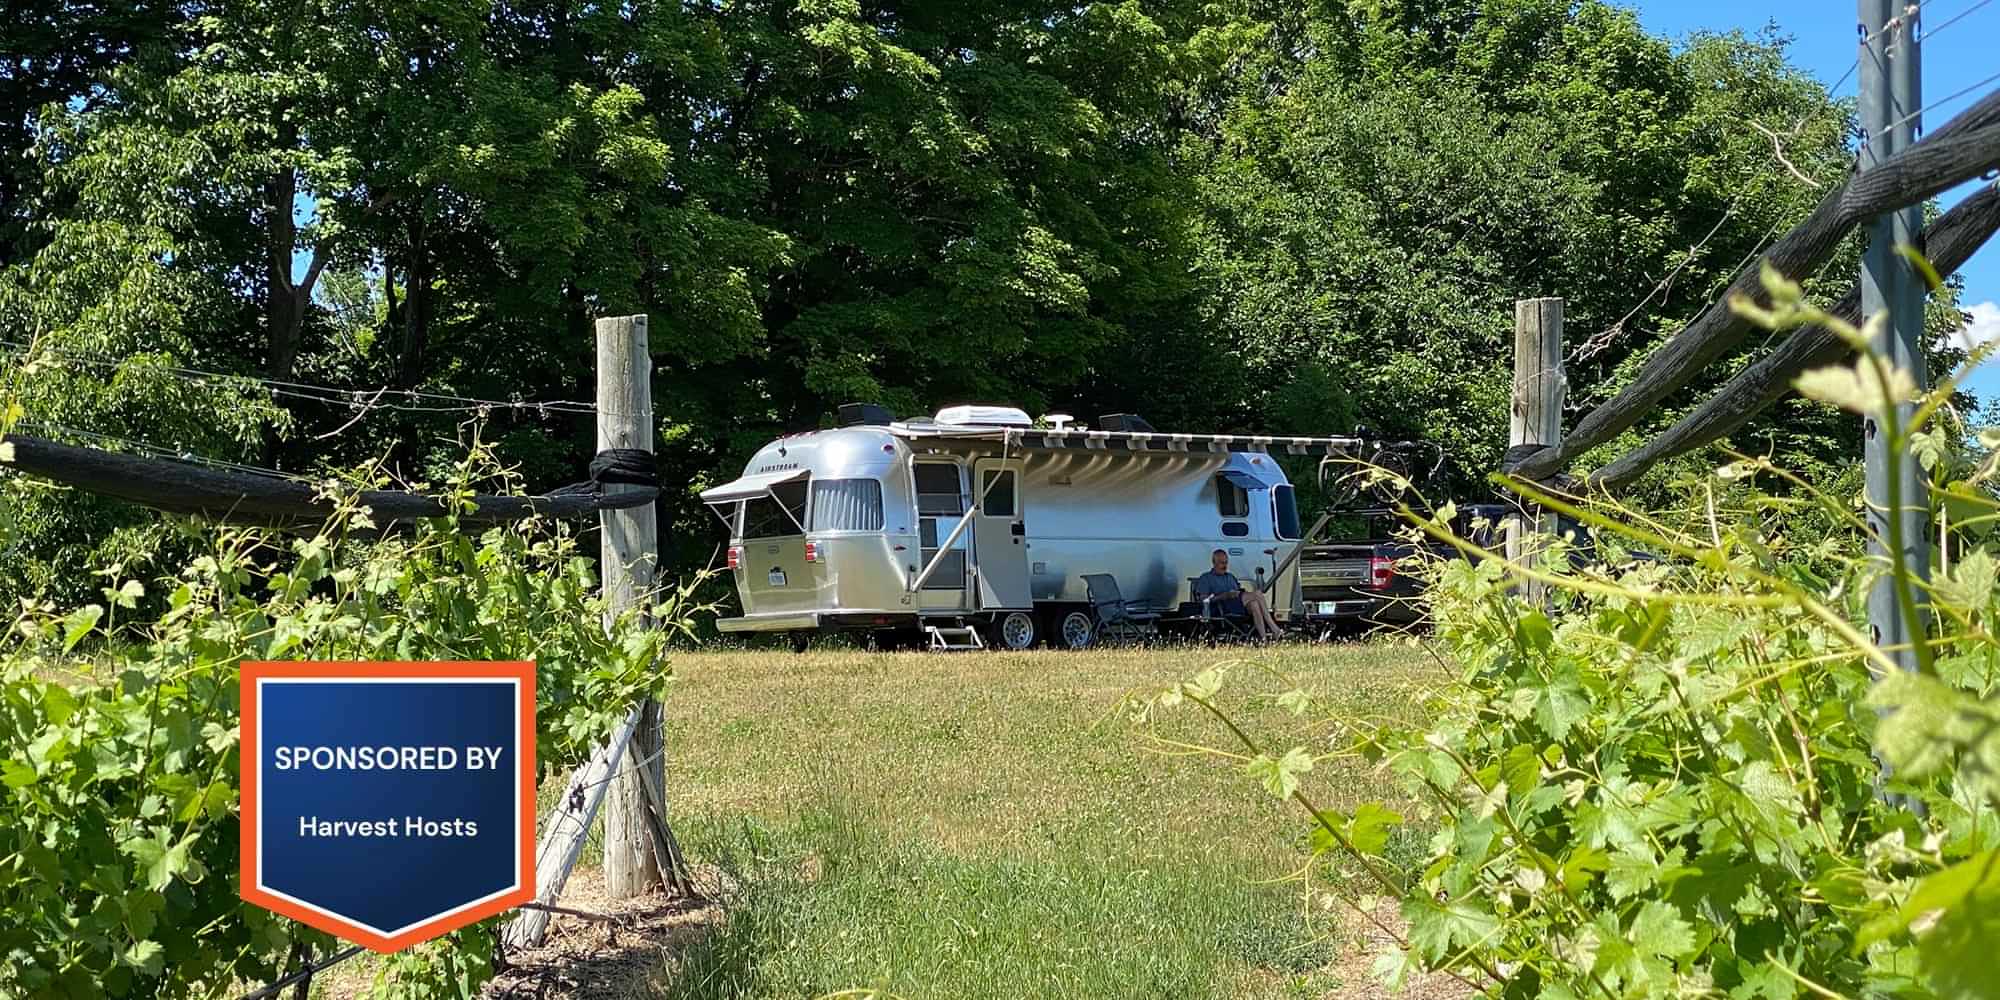 a man relaxes on one of two lawn chairs under the awning of his vintage looking travel trailer parked among trees and shrubs